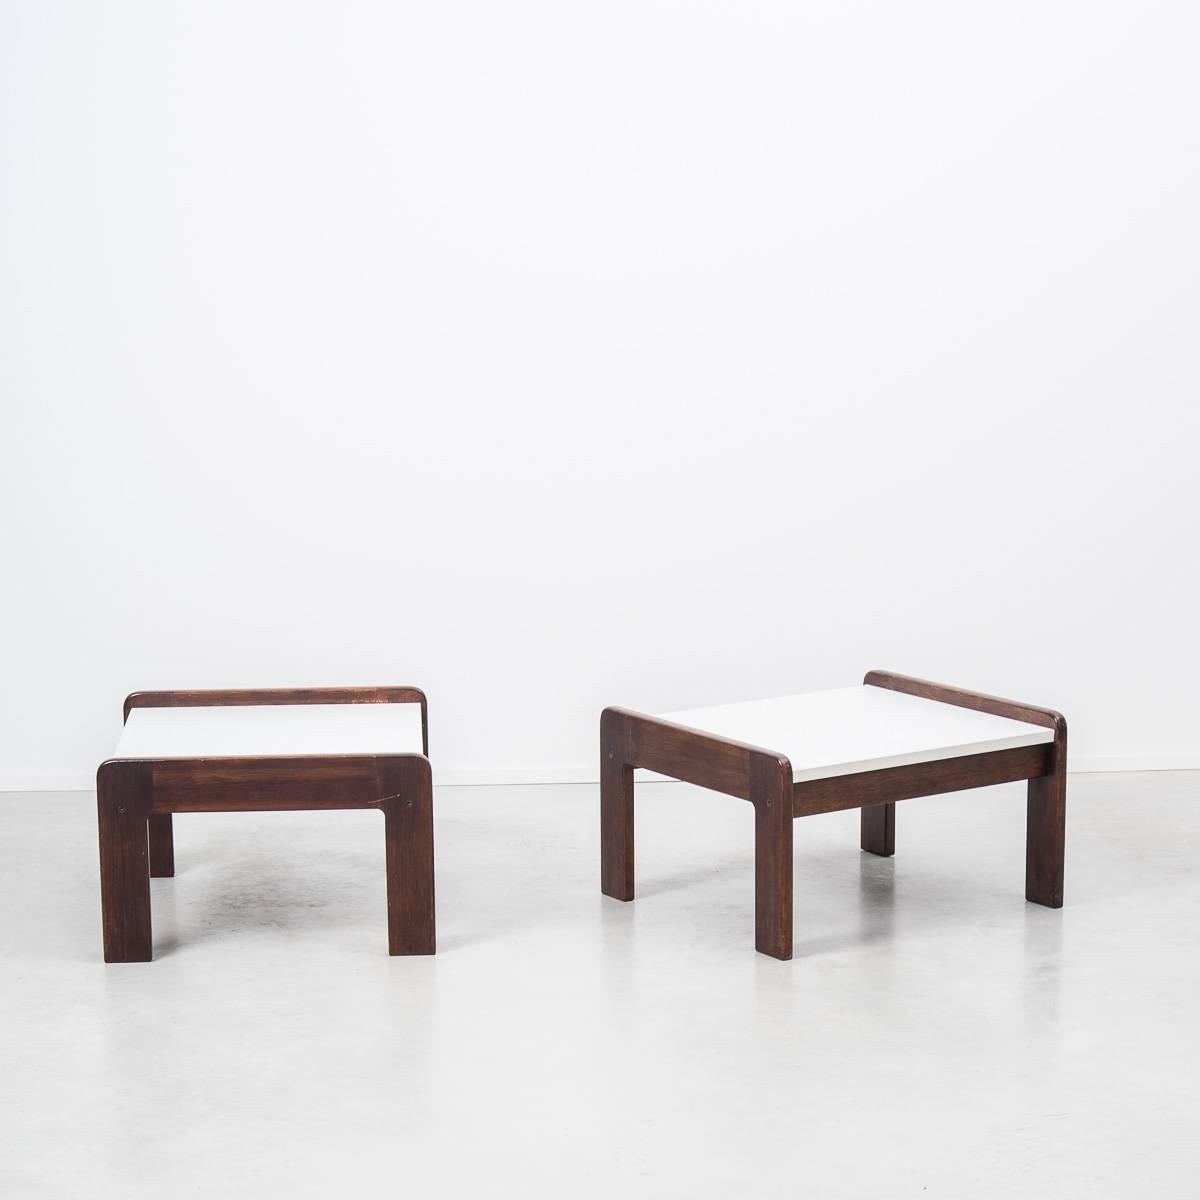 Cees Braakman was the head designer at UMS Pastoe, one of the largest and most respected Dutch modernist furniture manufacturers of the era.

In the 1960s he presented a series of works in wenge and laminate for the company, so these are presumed to